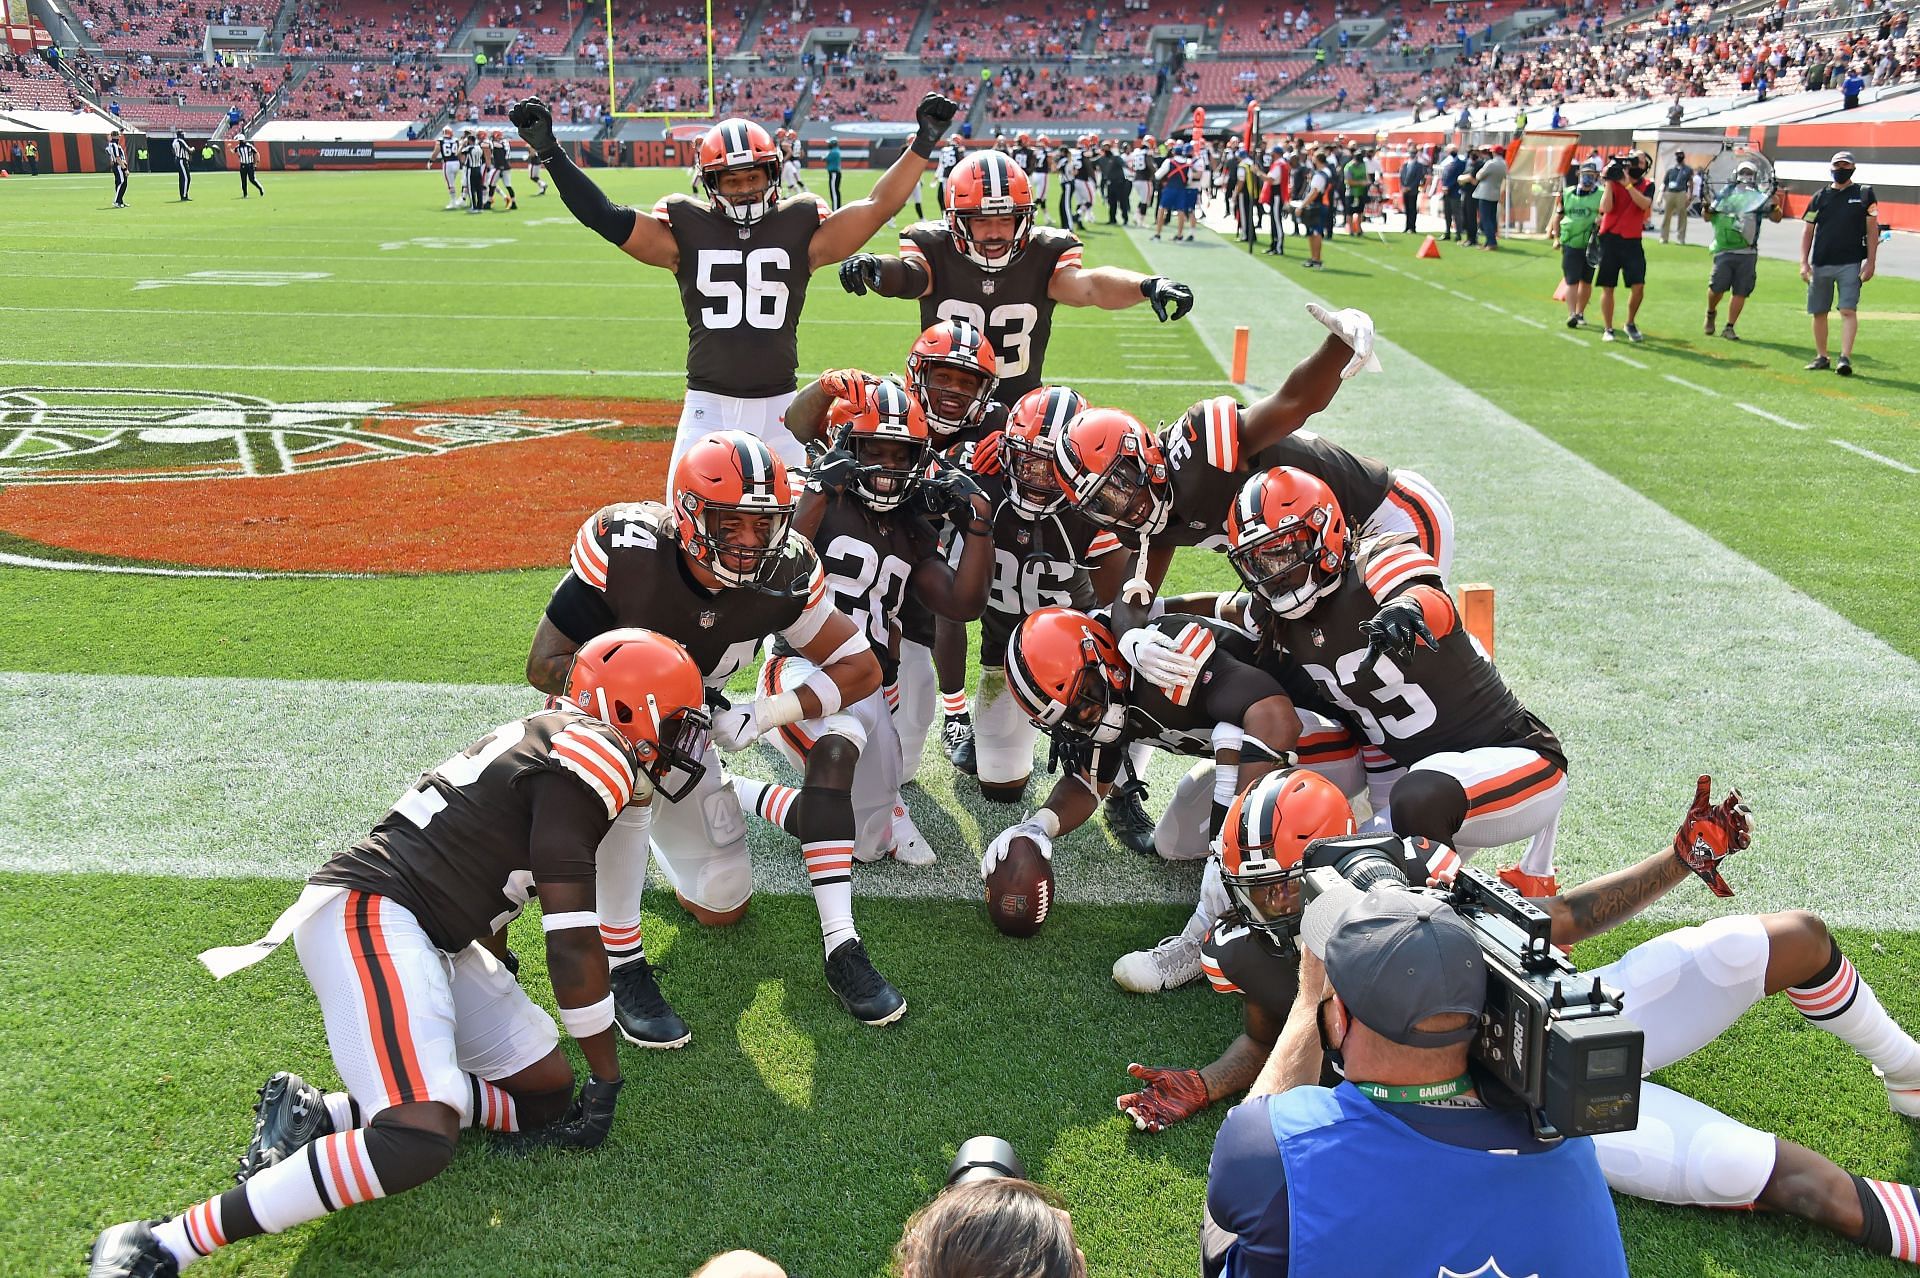 Why does Cleveland have Browns as their team name?